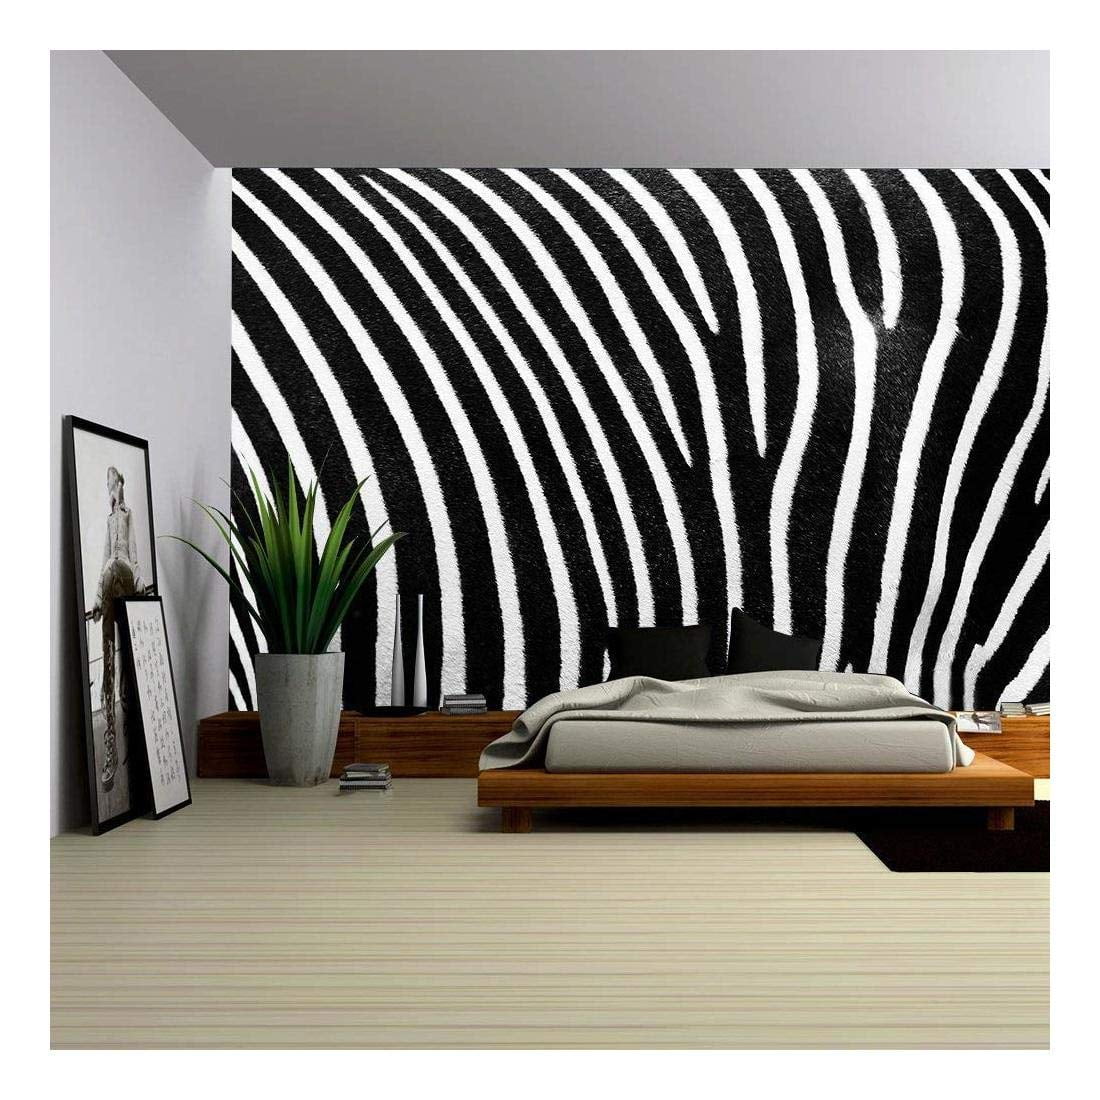 wall26 - Black and White Texture of Zebra Skin - Removable Wall Mural